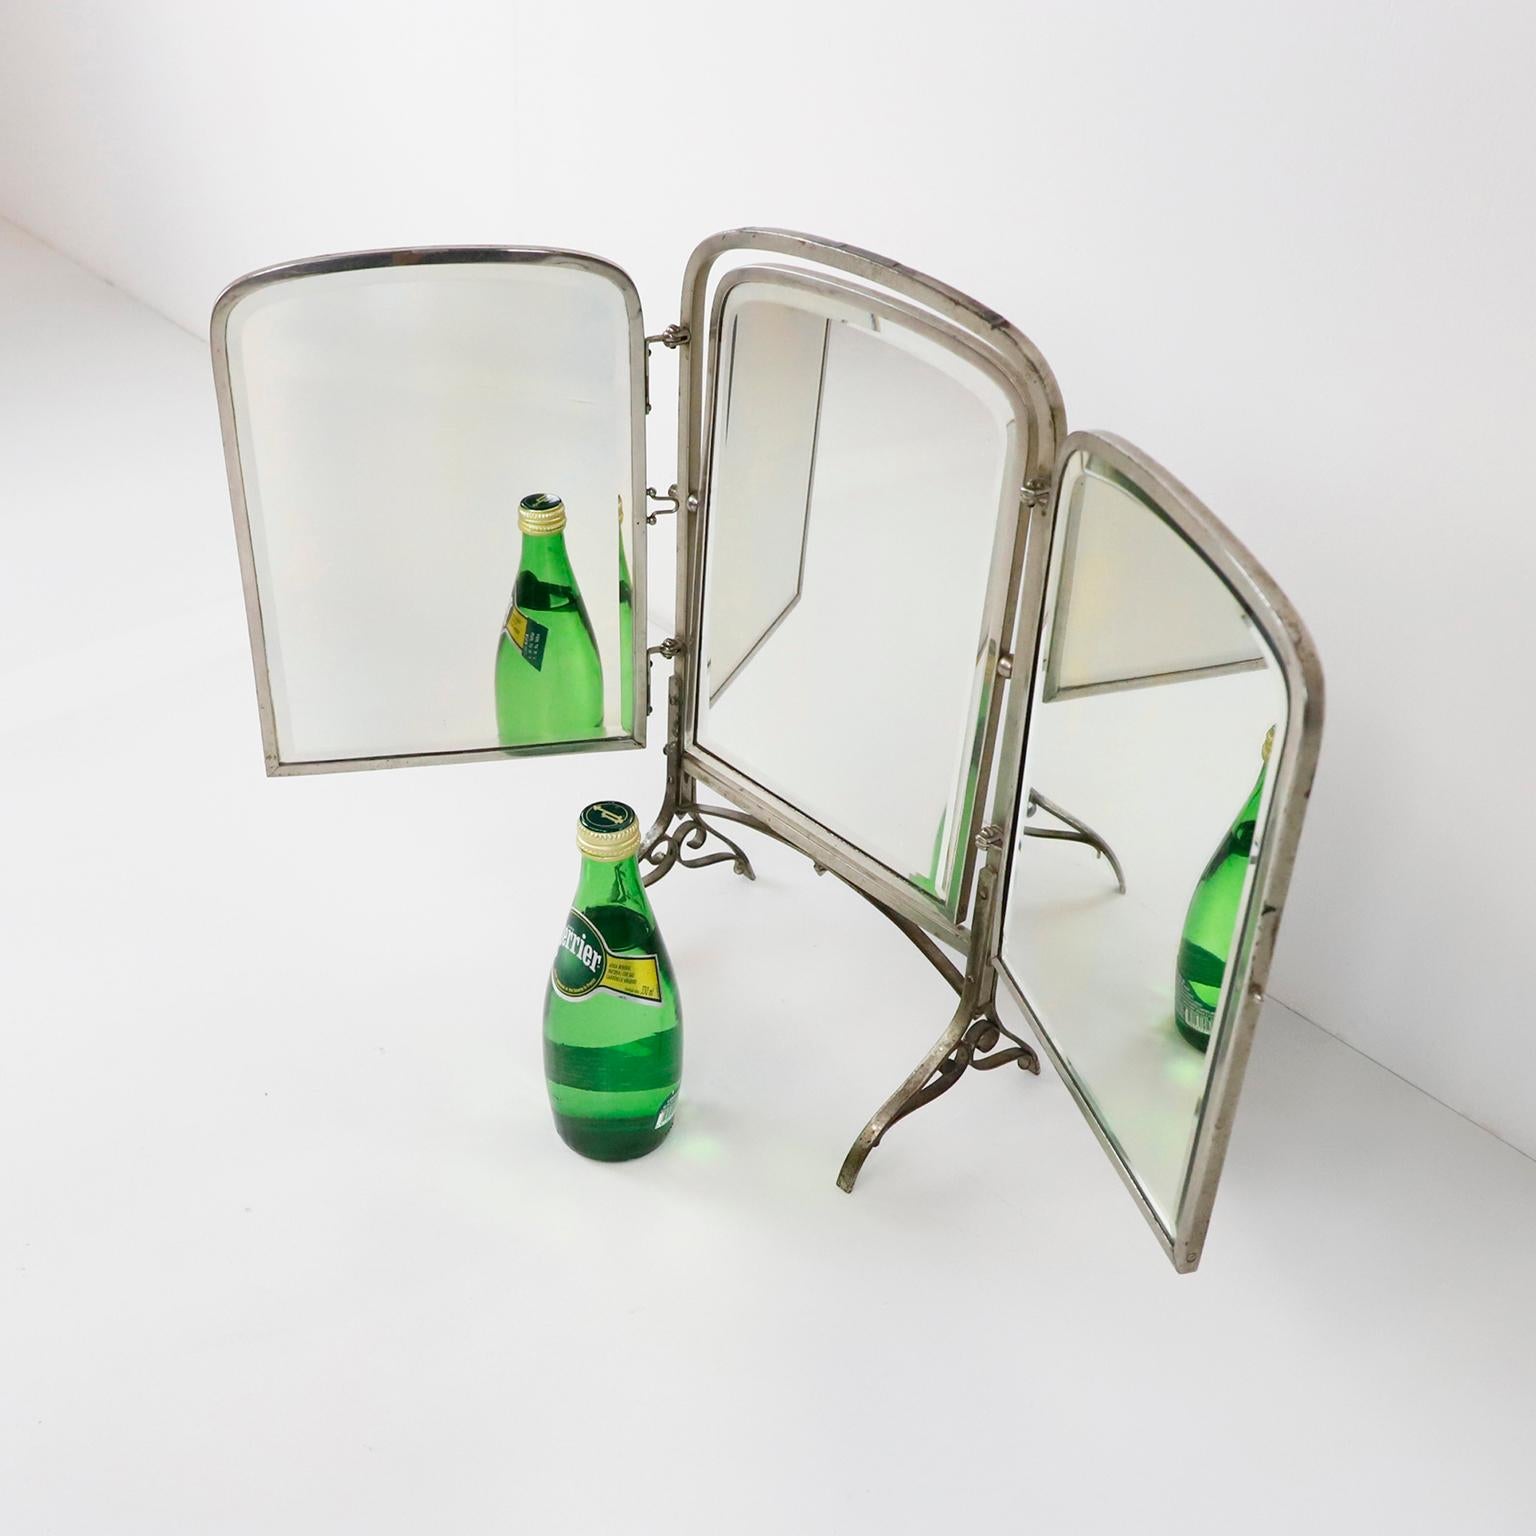 Mid-20th Century French Art Nouveau Vanity Mirror, Original Mirrors For Sale